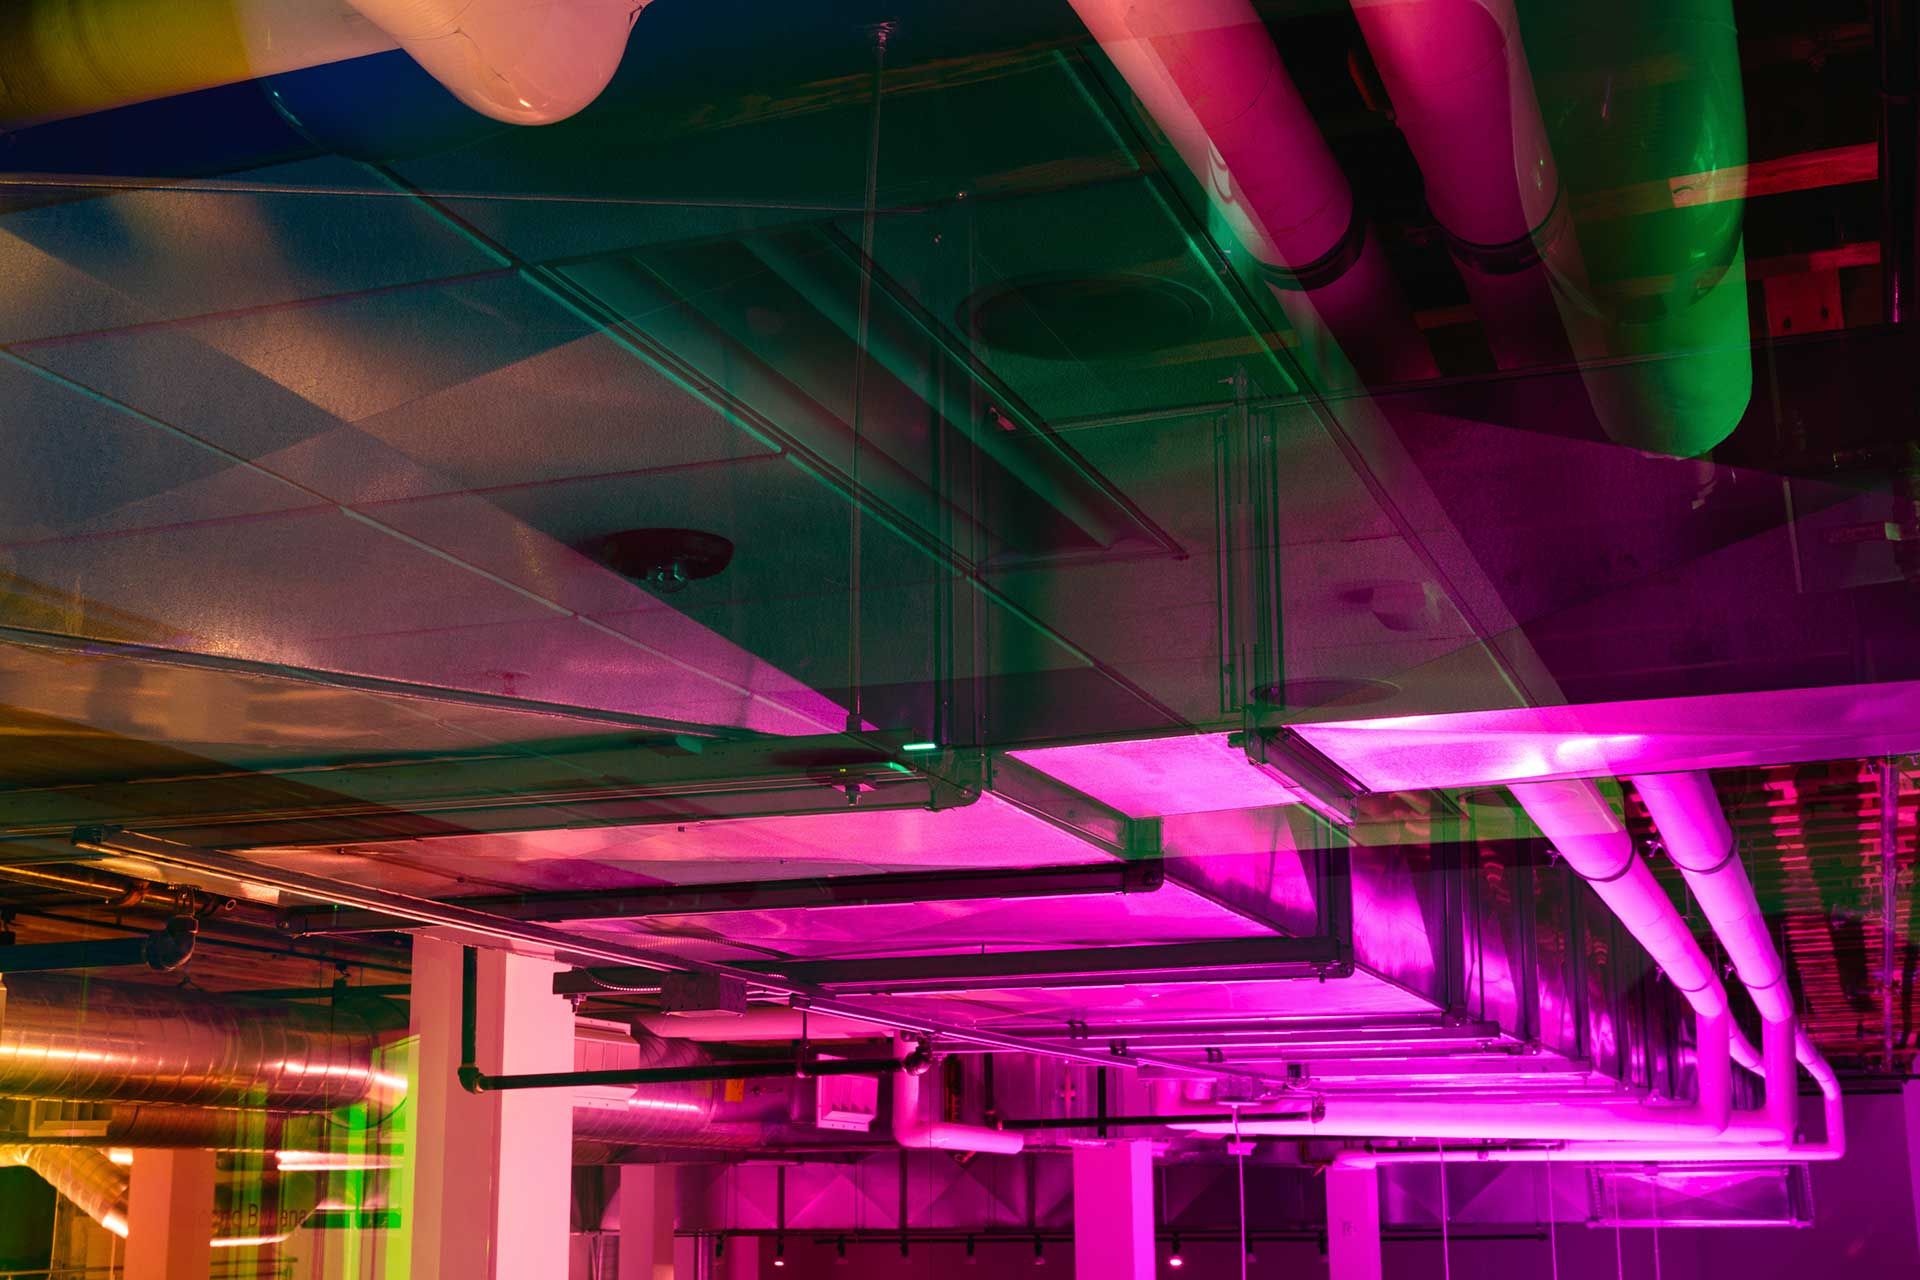 Pink light cast onto the ceiling showing air-conditioning ducts